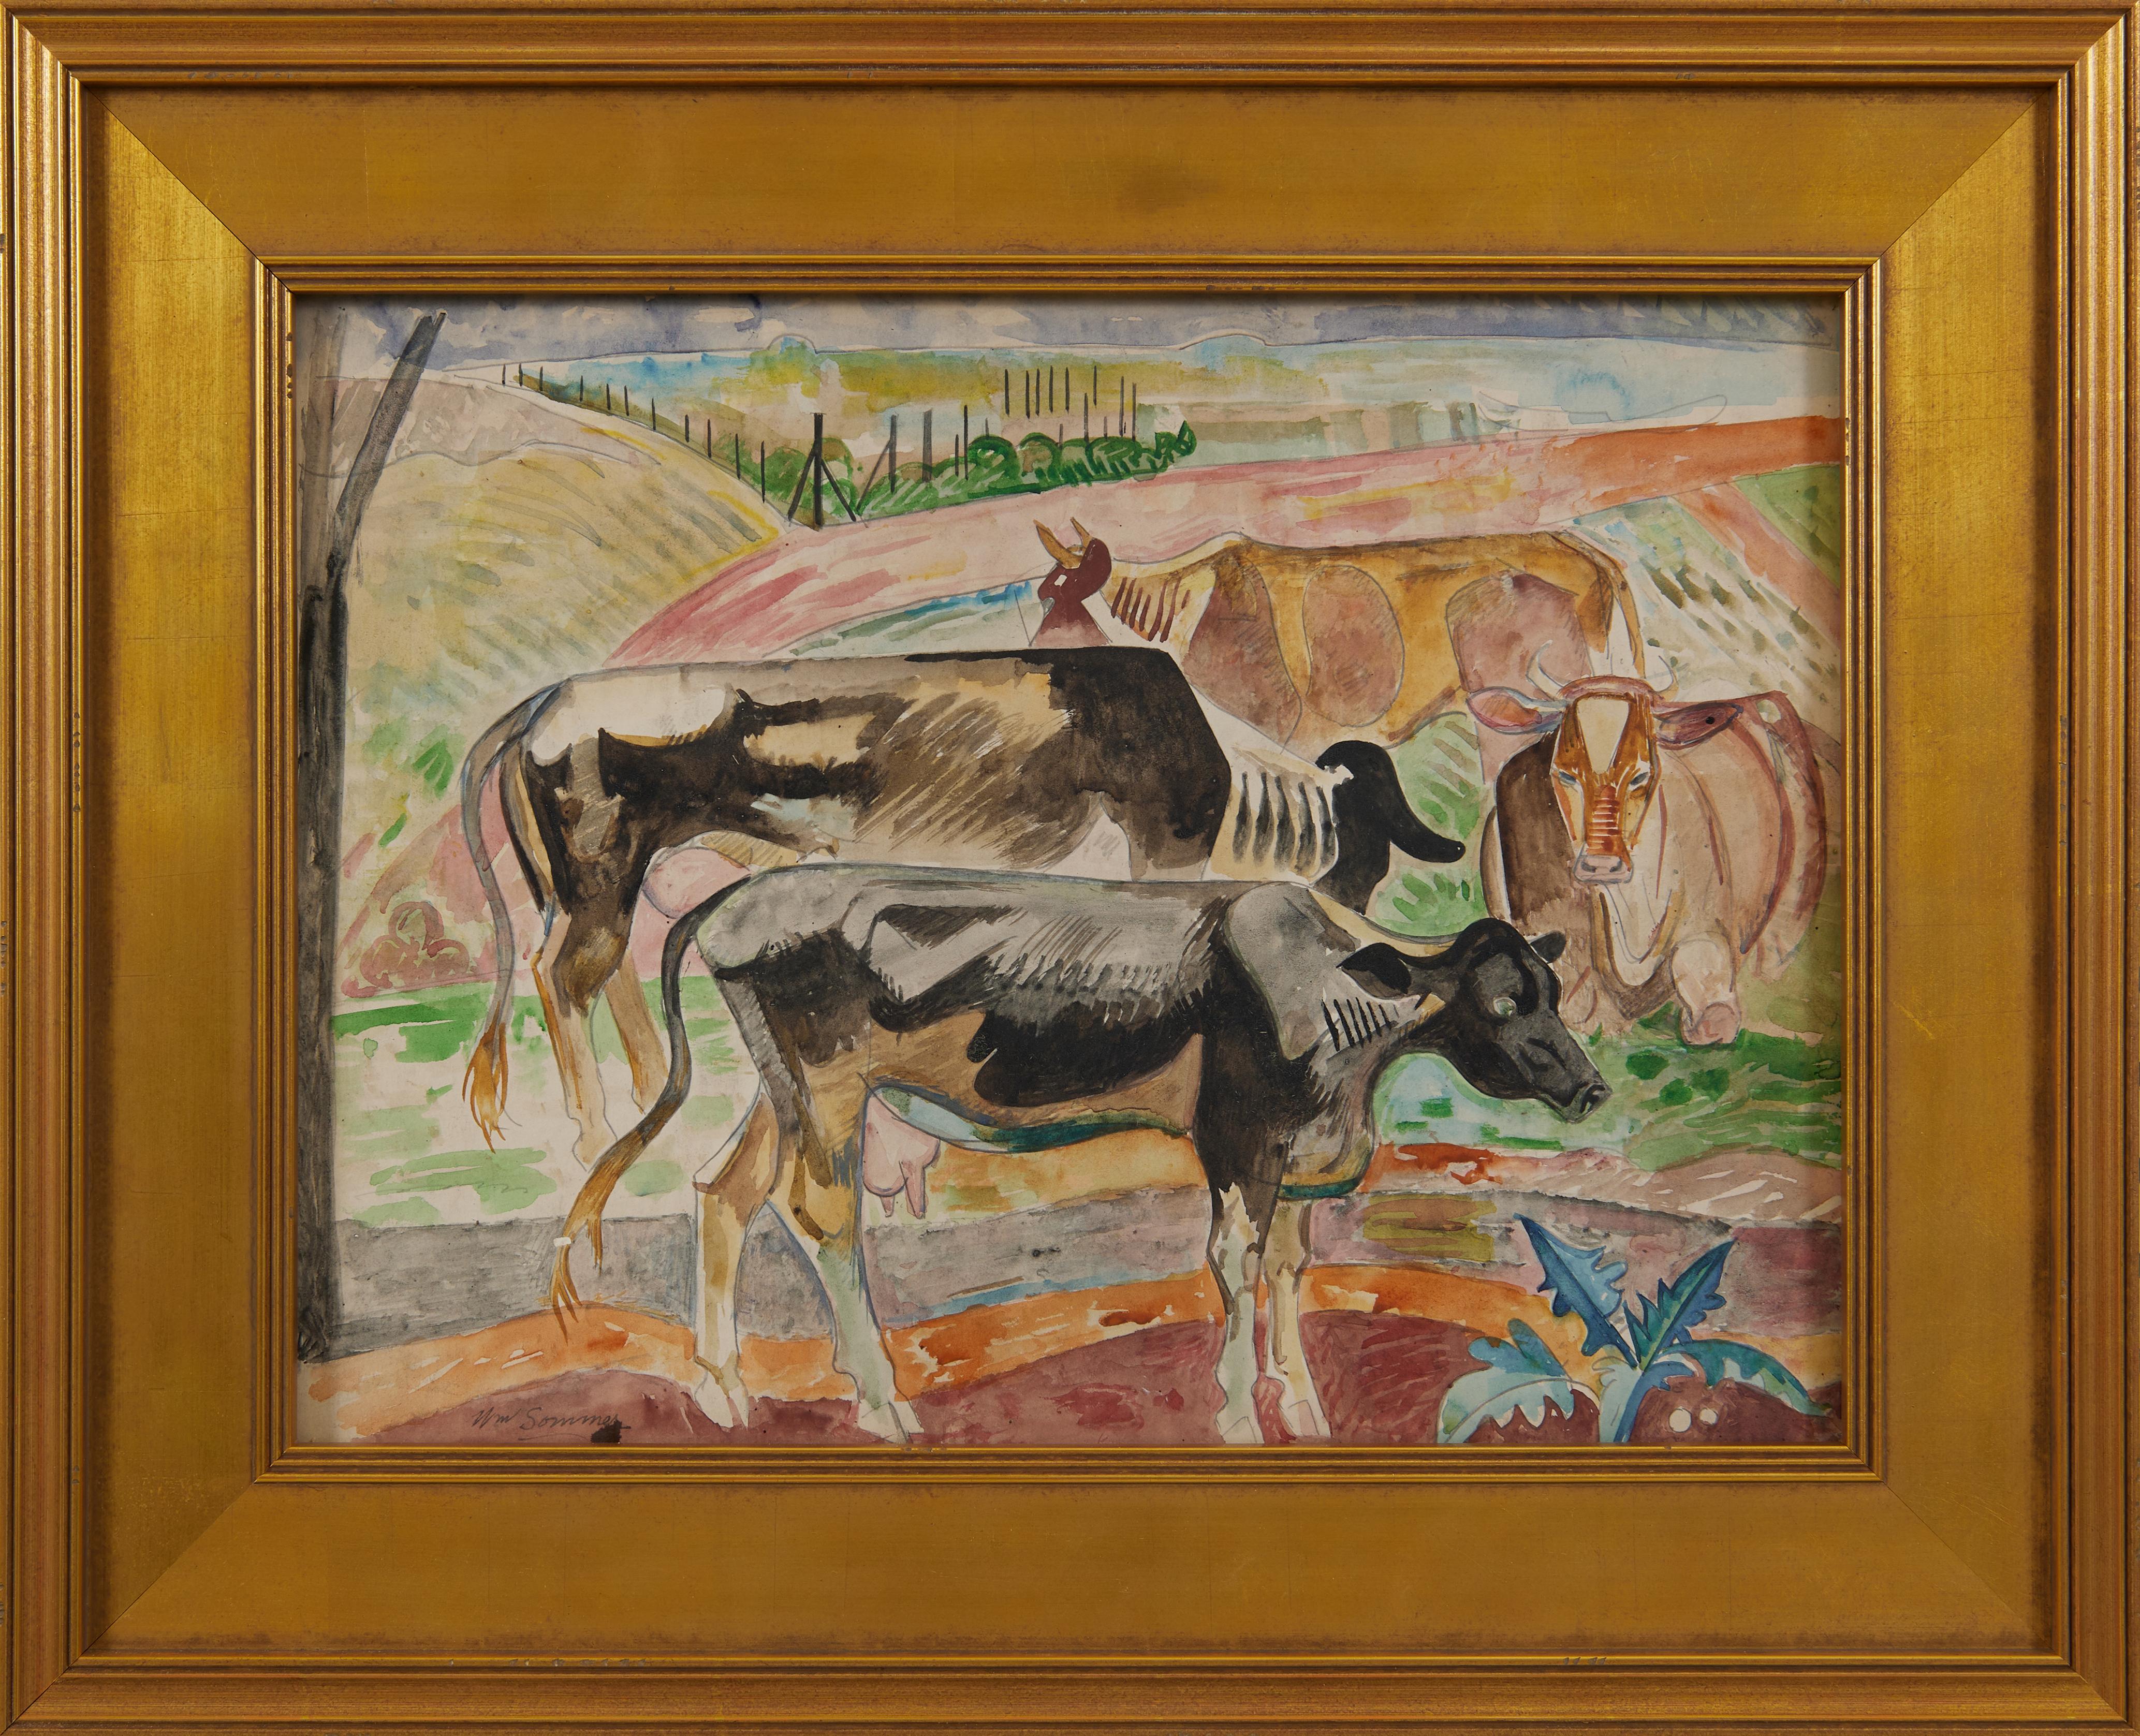 Cows in a Field, Early 20th Century American Modernist Landscape Watercolor - Art by William Sommer